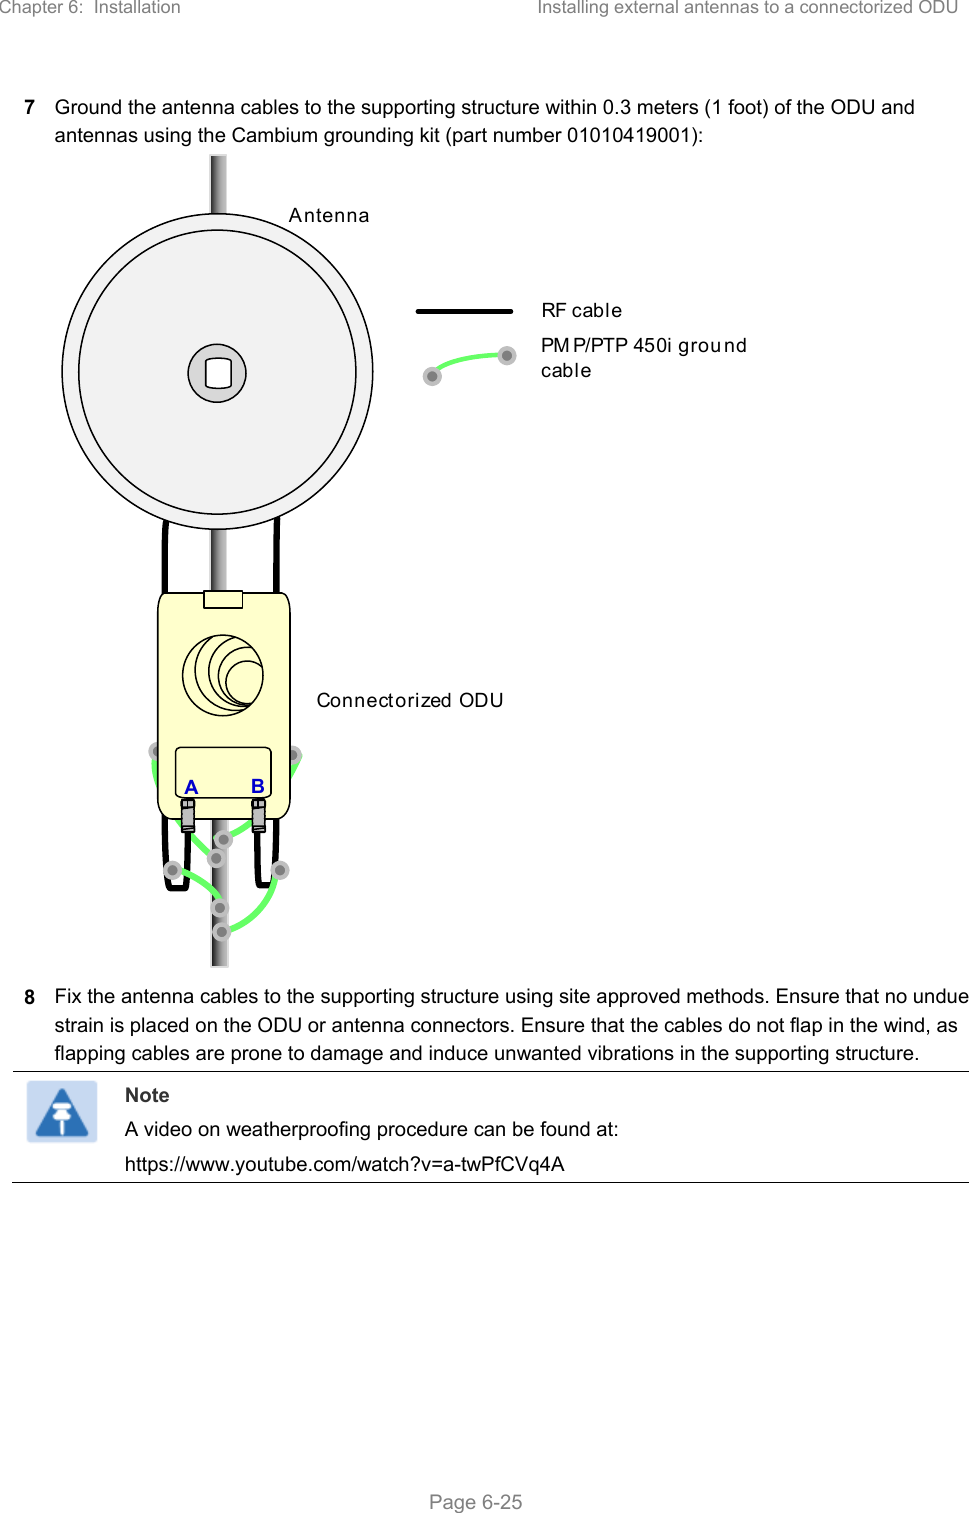 Chapter 6:  Installation  Installing external antennas to a connectorized ODU   Page 6-25 7  Ground the antenna cables to the supporting structure within 0.3 meters (1 foot) of the ODU and antennas using the Cambium grounding kit (part number 01010419001):  Connectorized ODUABPM P/PTP 450i grou nd cableRF cableAntenna 8  Fix the antenna cables to the supporting structure using site approved methods. Ensure that no undue strain is placed on the ODU or antenna connectors. Ensure that the cables do not flap in the wind, as flapping cables are prone to damage and induce unwanted vibrations in the supporting structure.  Note A video on weatherproofing procedure can be found at:  https://www.youtube.com/watch?v=a-twPfCVq4A  